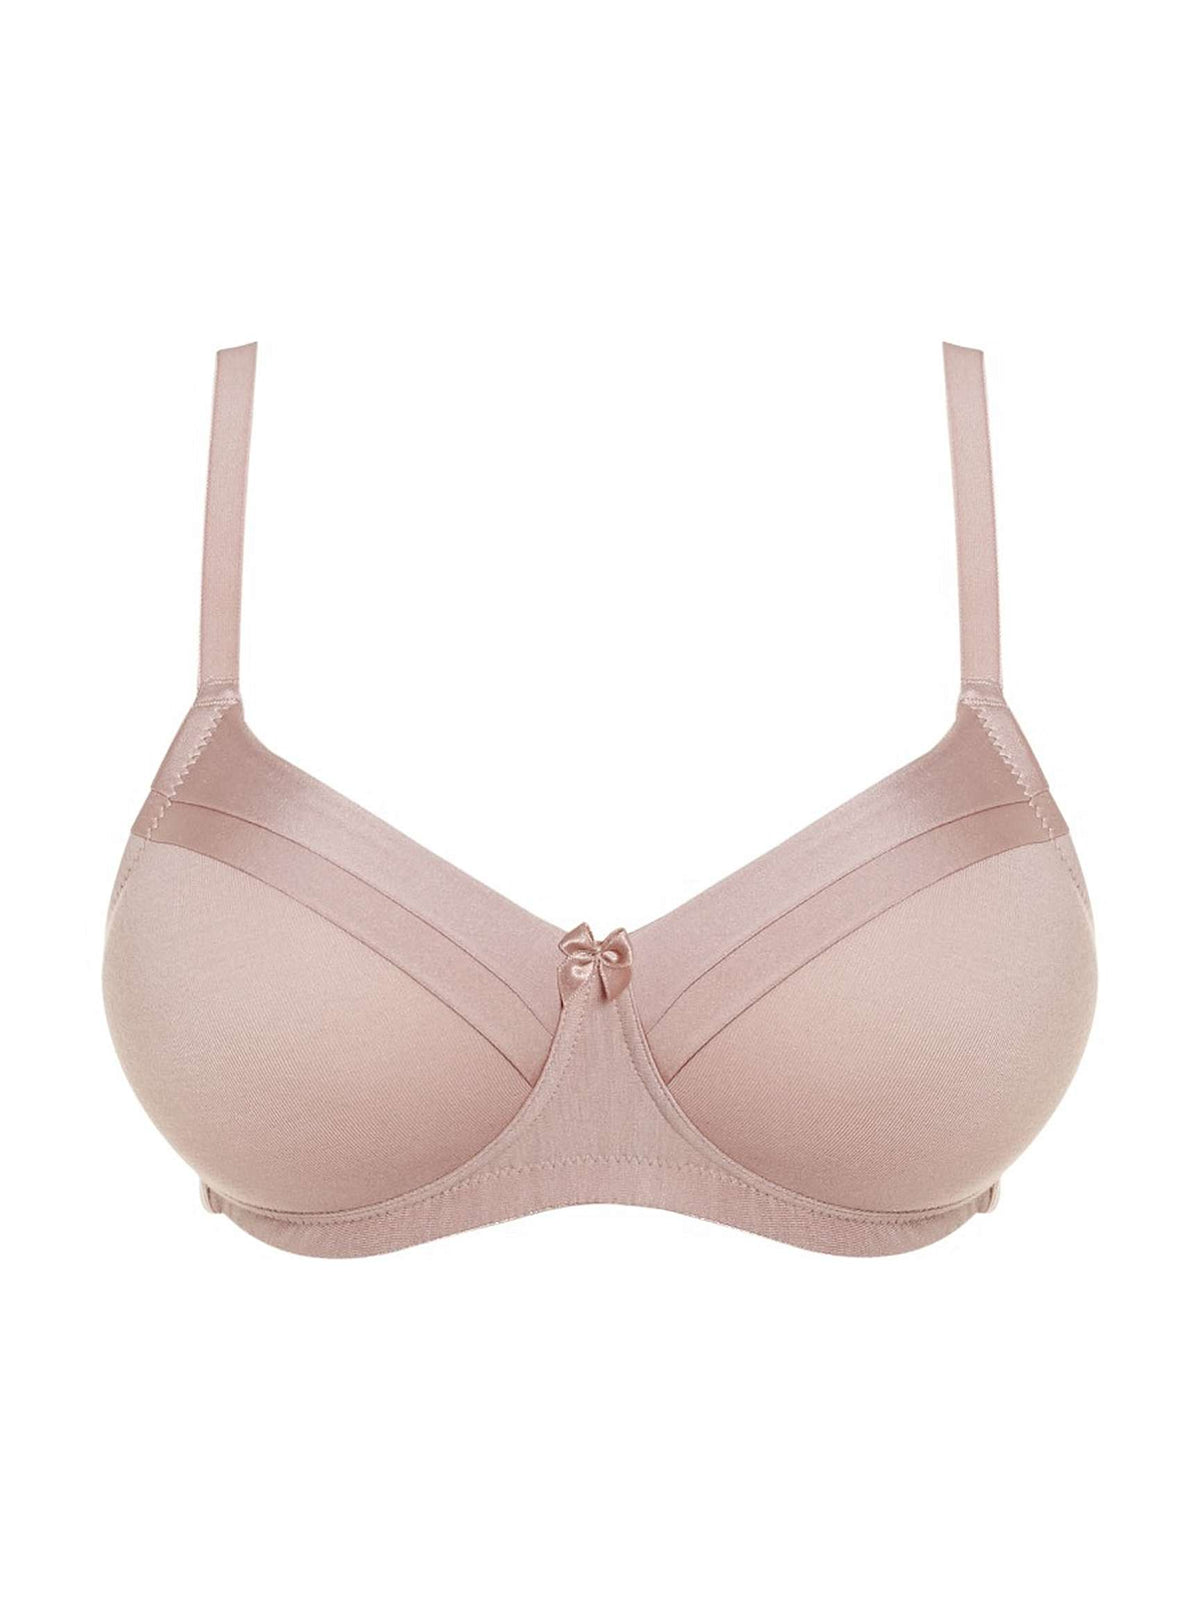 product view iin blush. The Maisie CARESS Soft-Cup Bra offers both comfort and style, with a beautiful design including satin cuff detailing and a charming bow. 